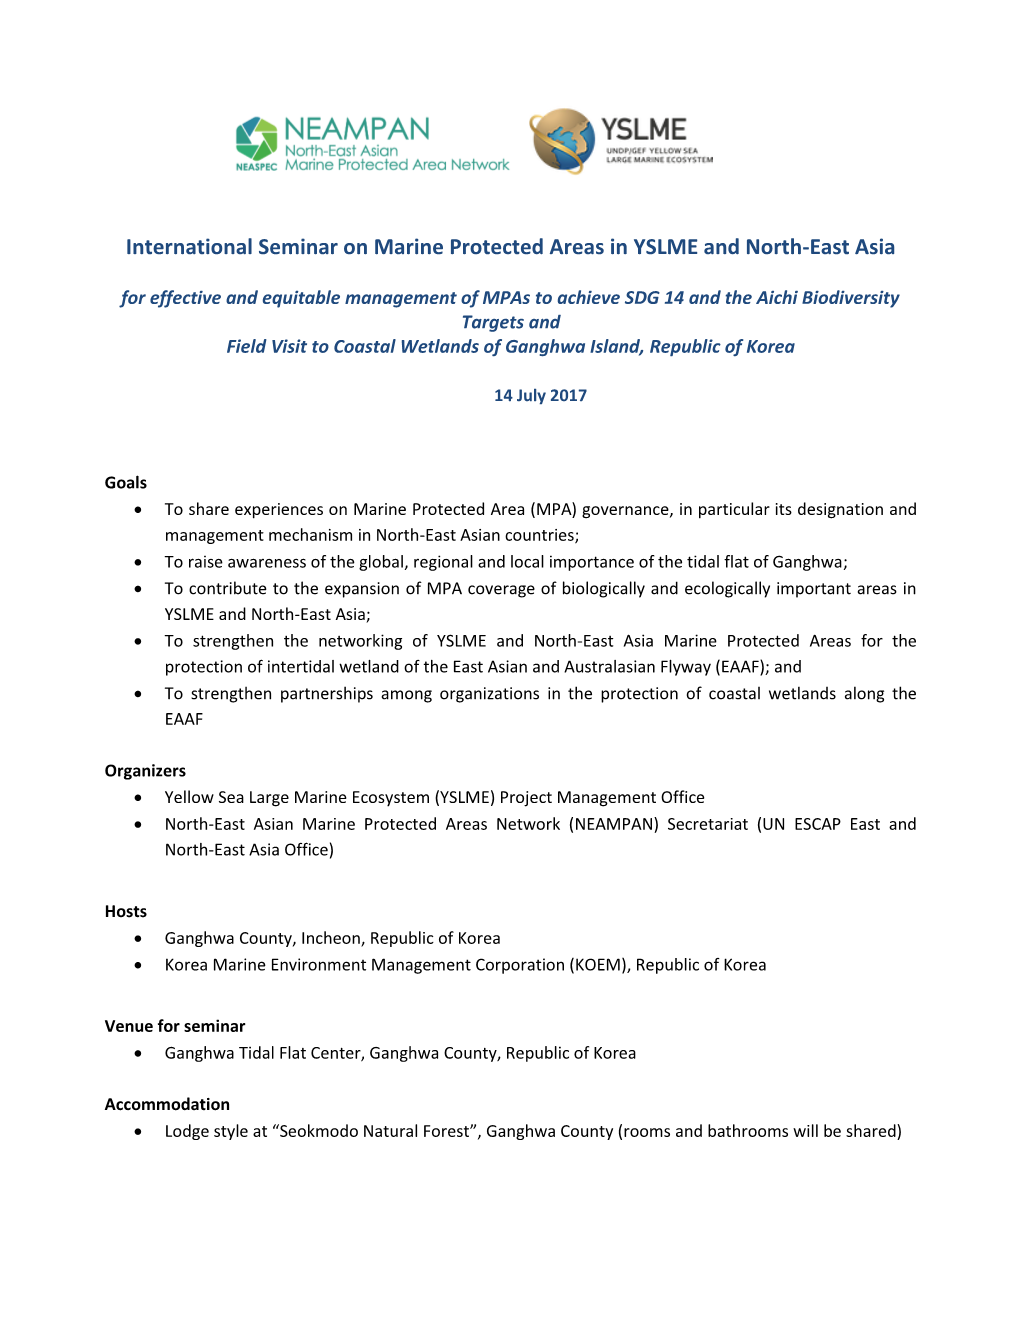 Programme for the International Seminar on Marine Protected Areas